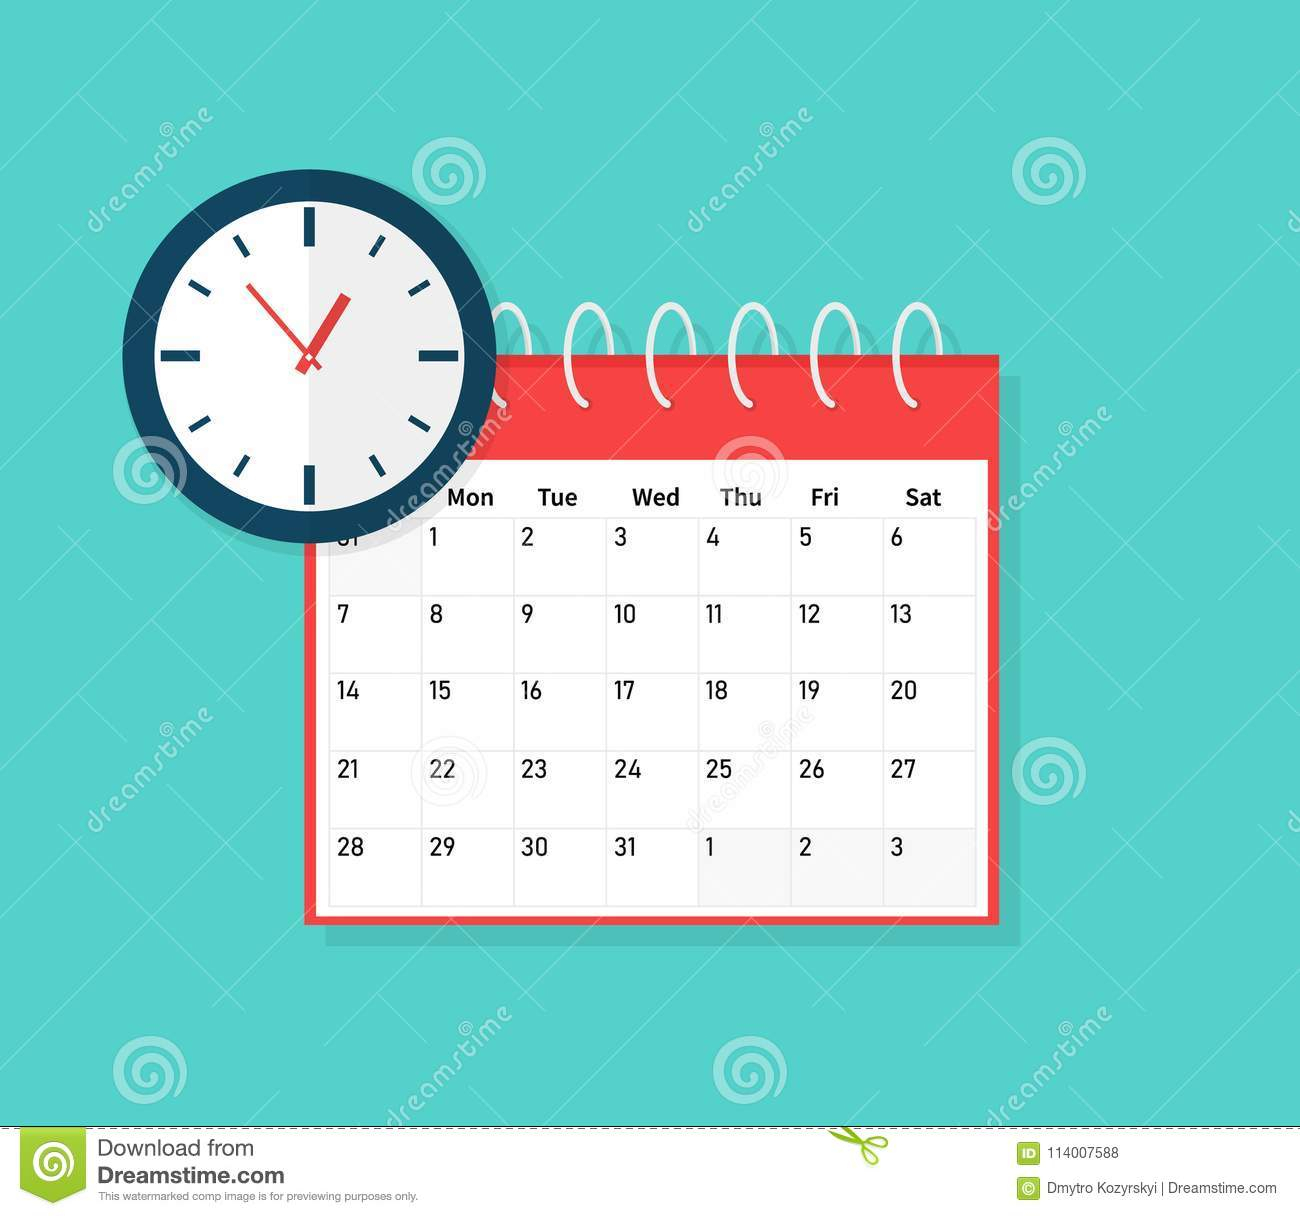 Calendar And Clock. Schedule, Appointment, Important Date Concept. Flat for Time And Date Calendar